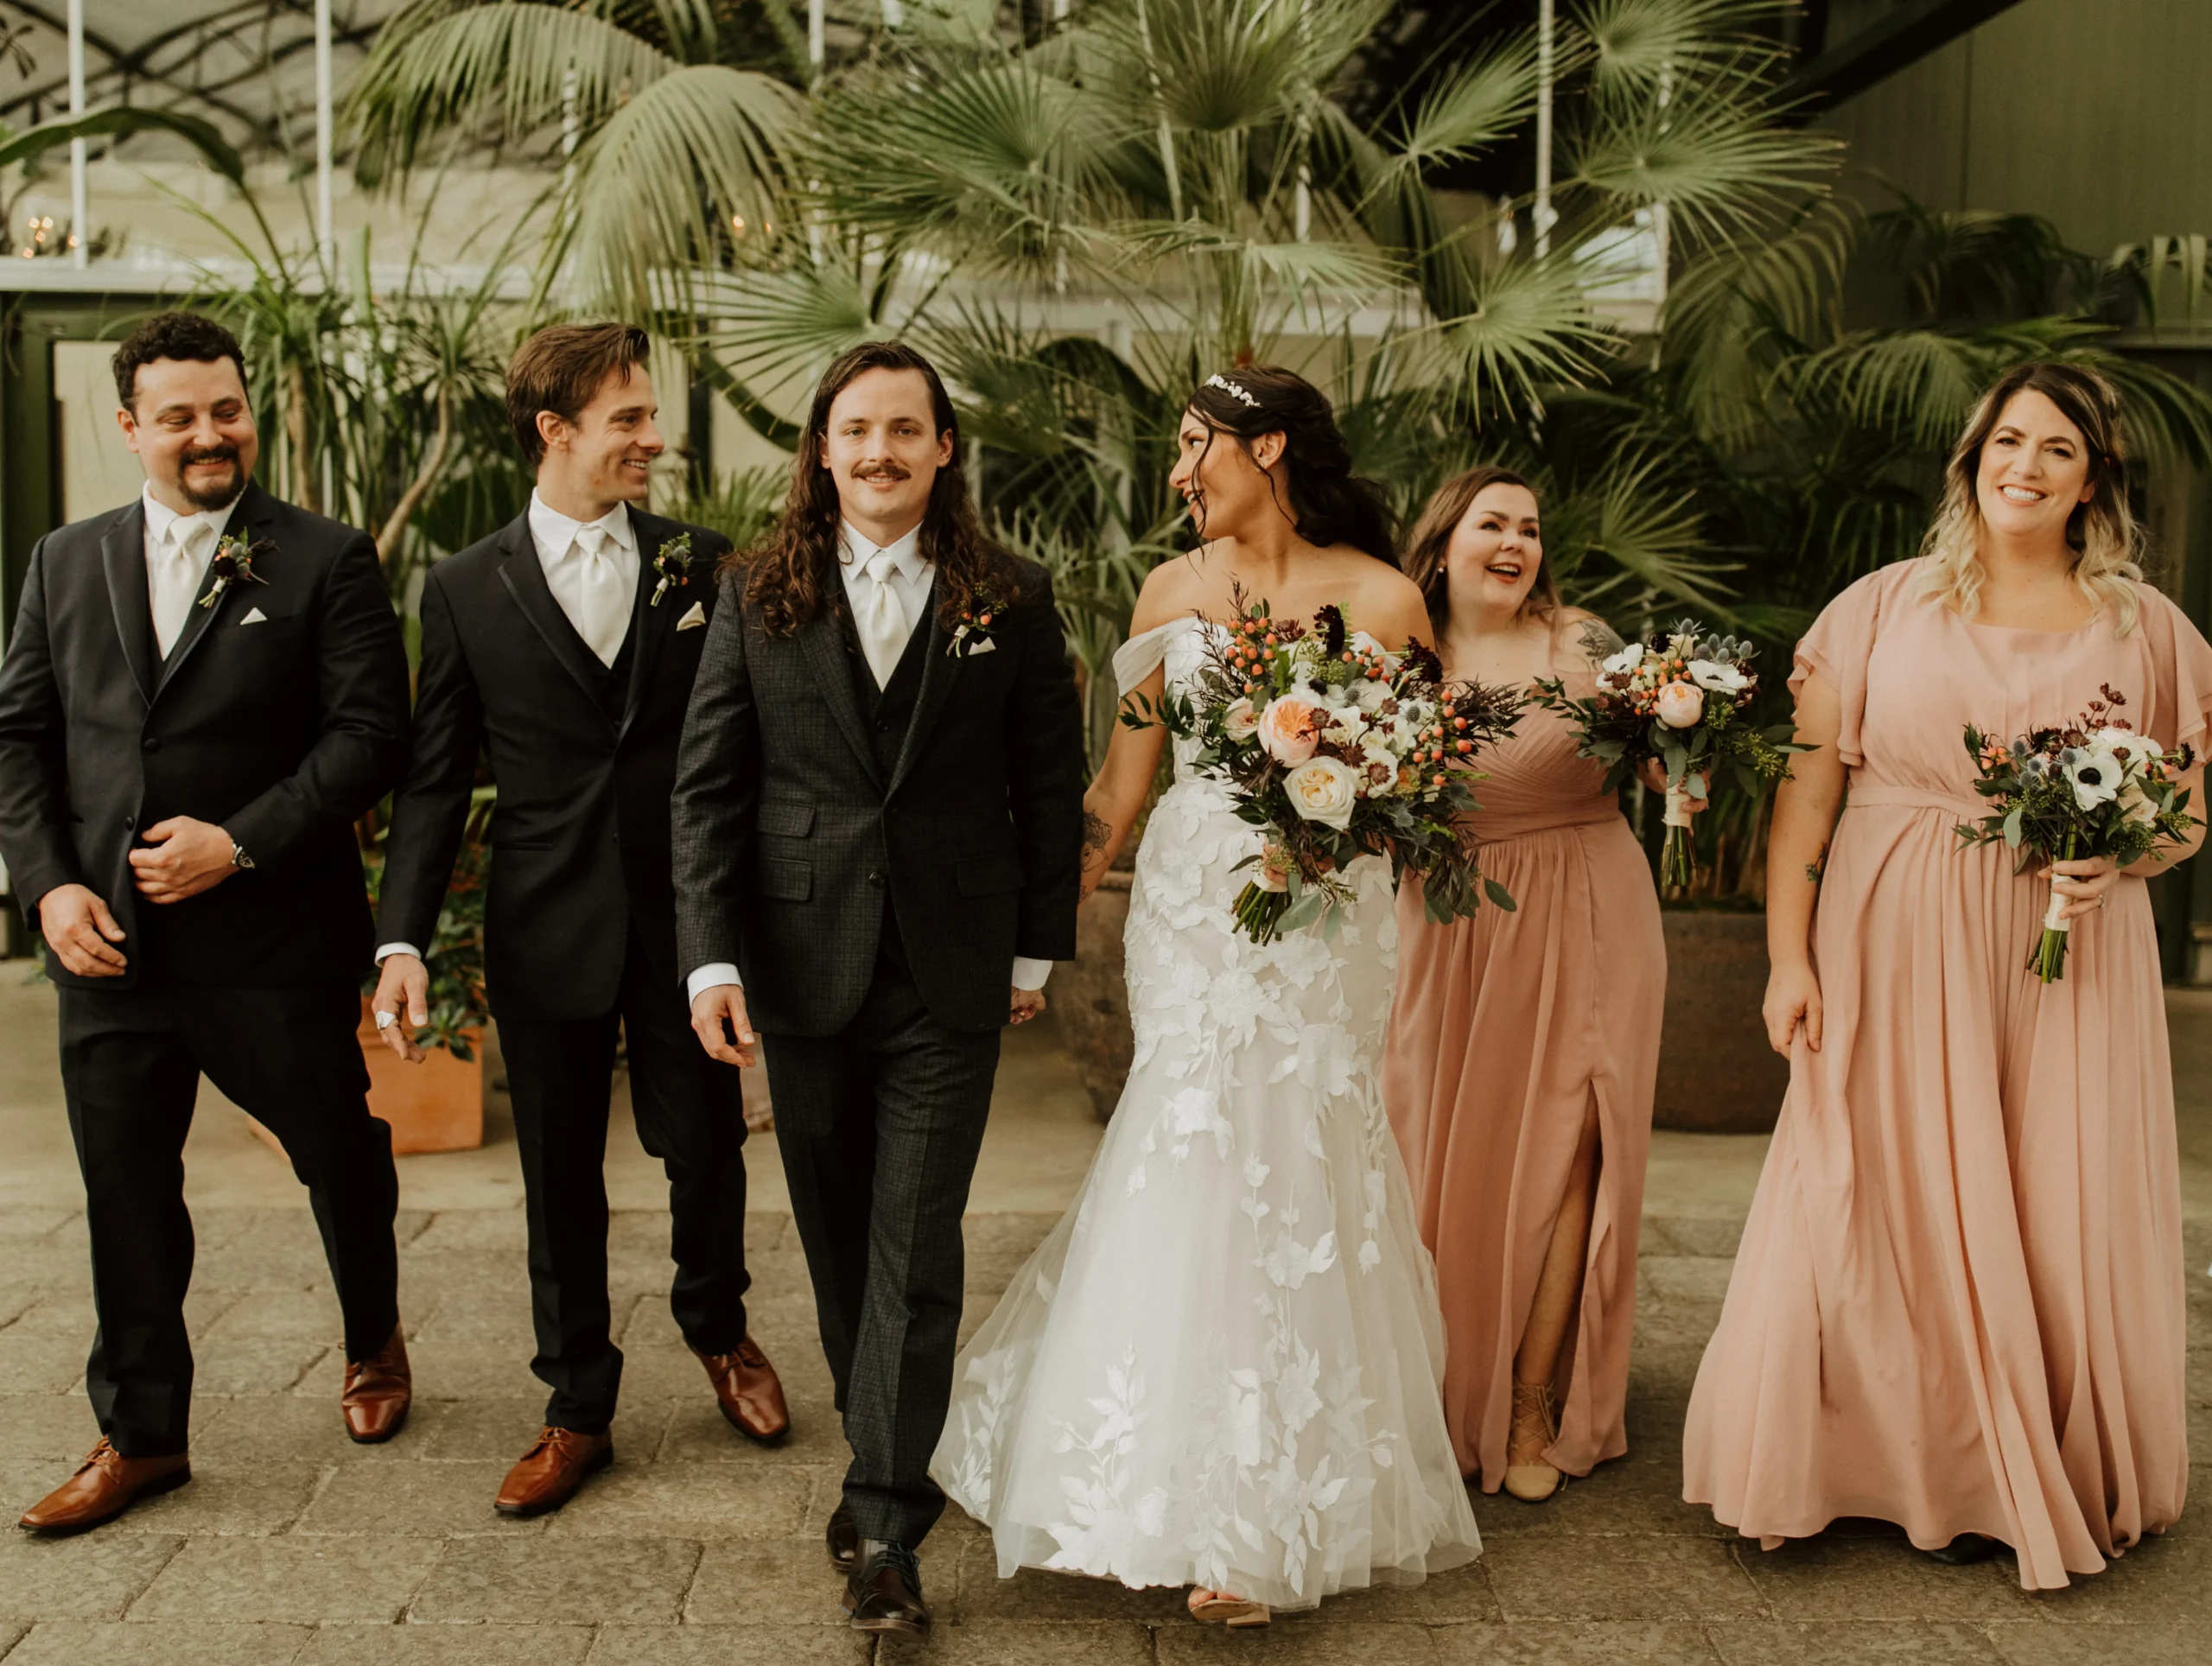 group photo of bride and groom with bridesmaids and groomsmen